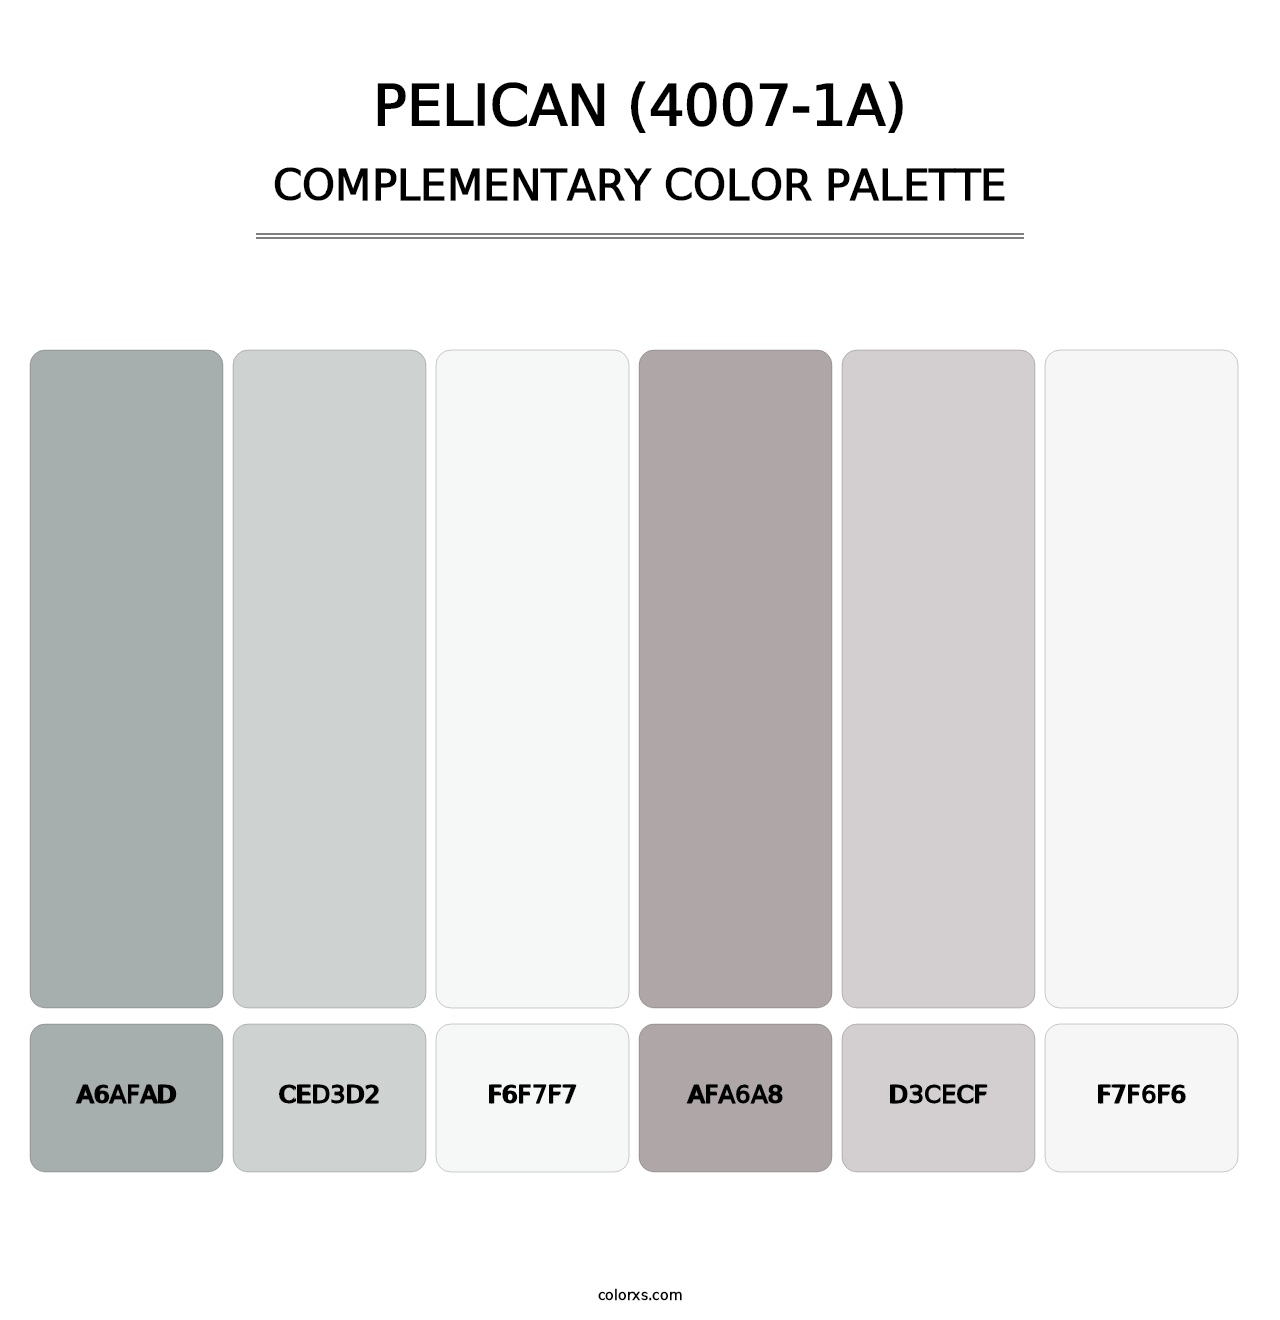 Pelican (4007-1A) - Complementary Color Palette